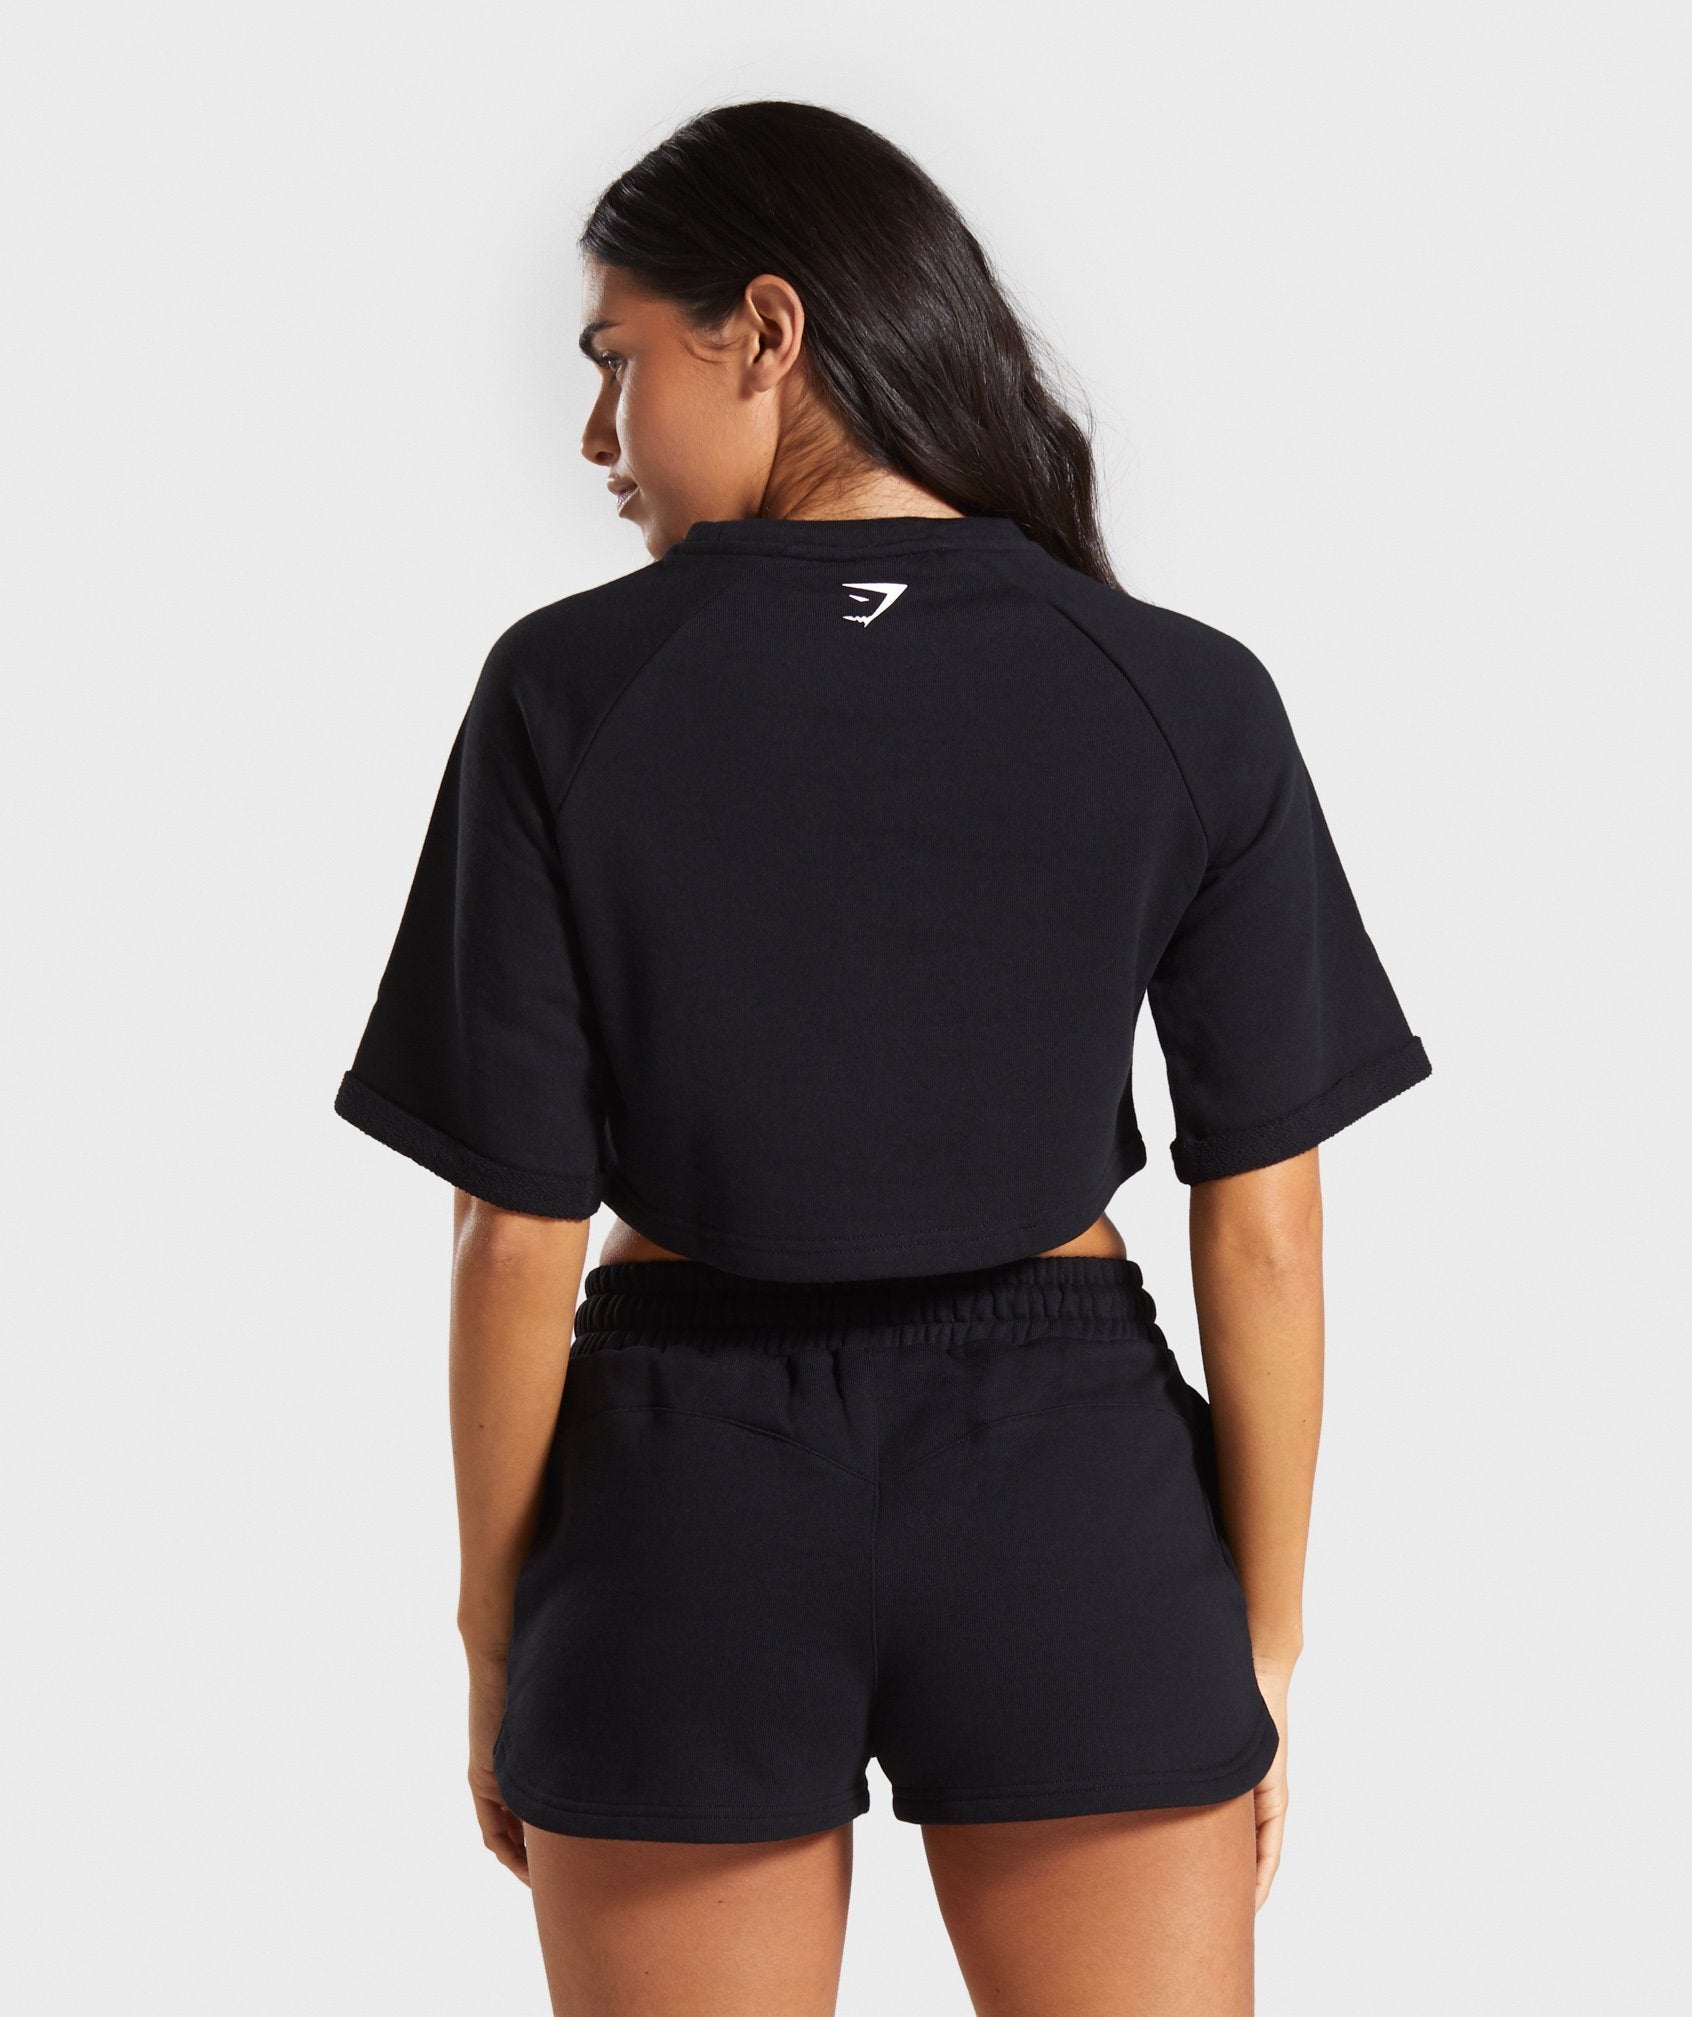 Dash Boxy Crop Top in Black - view 2